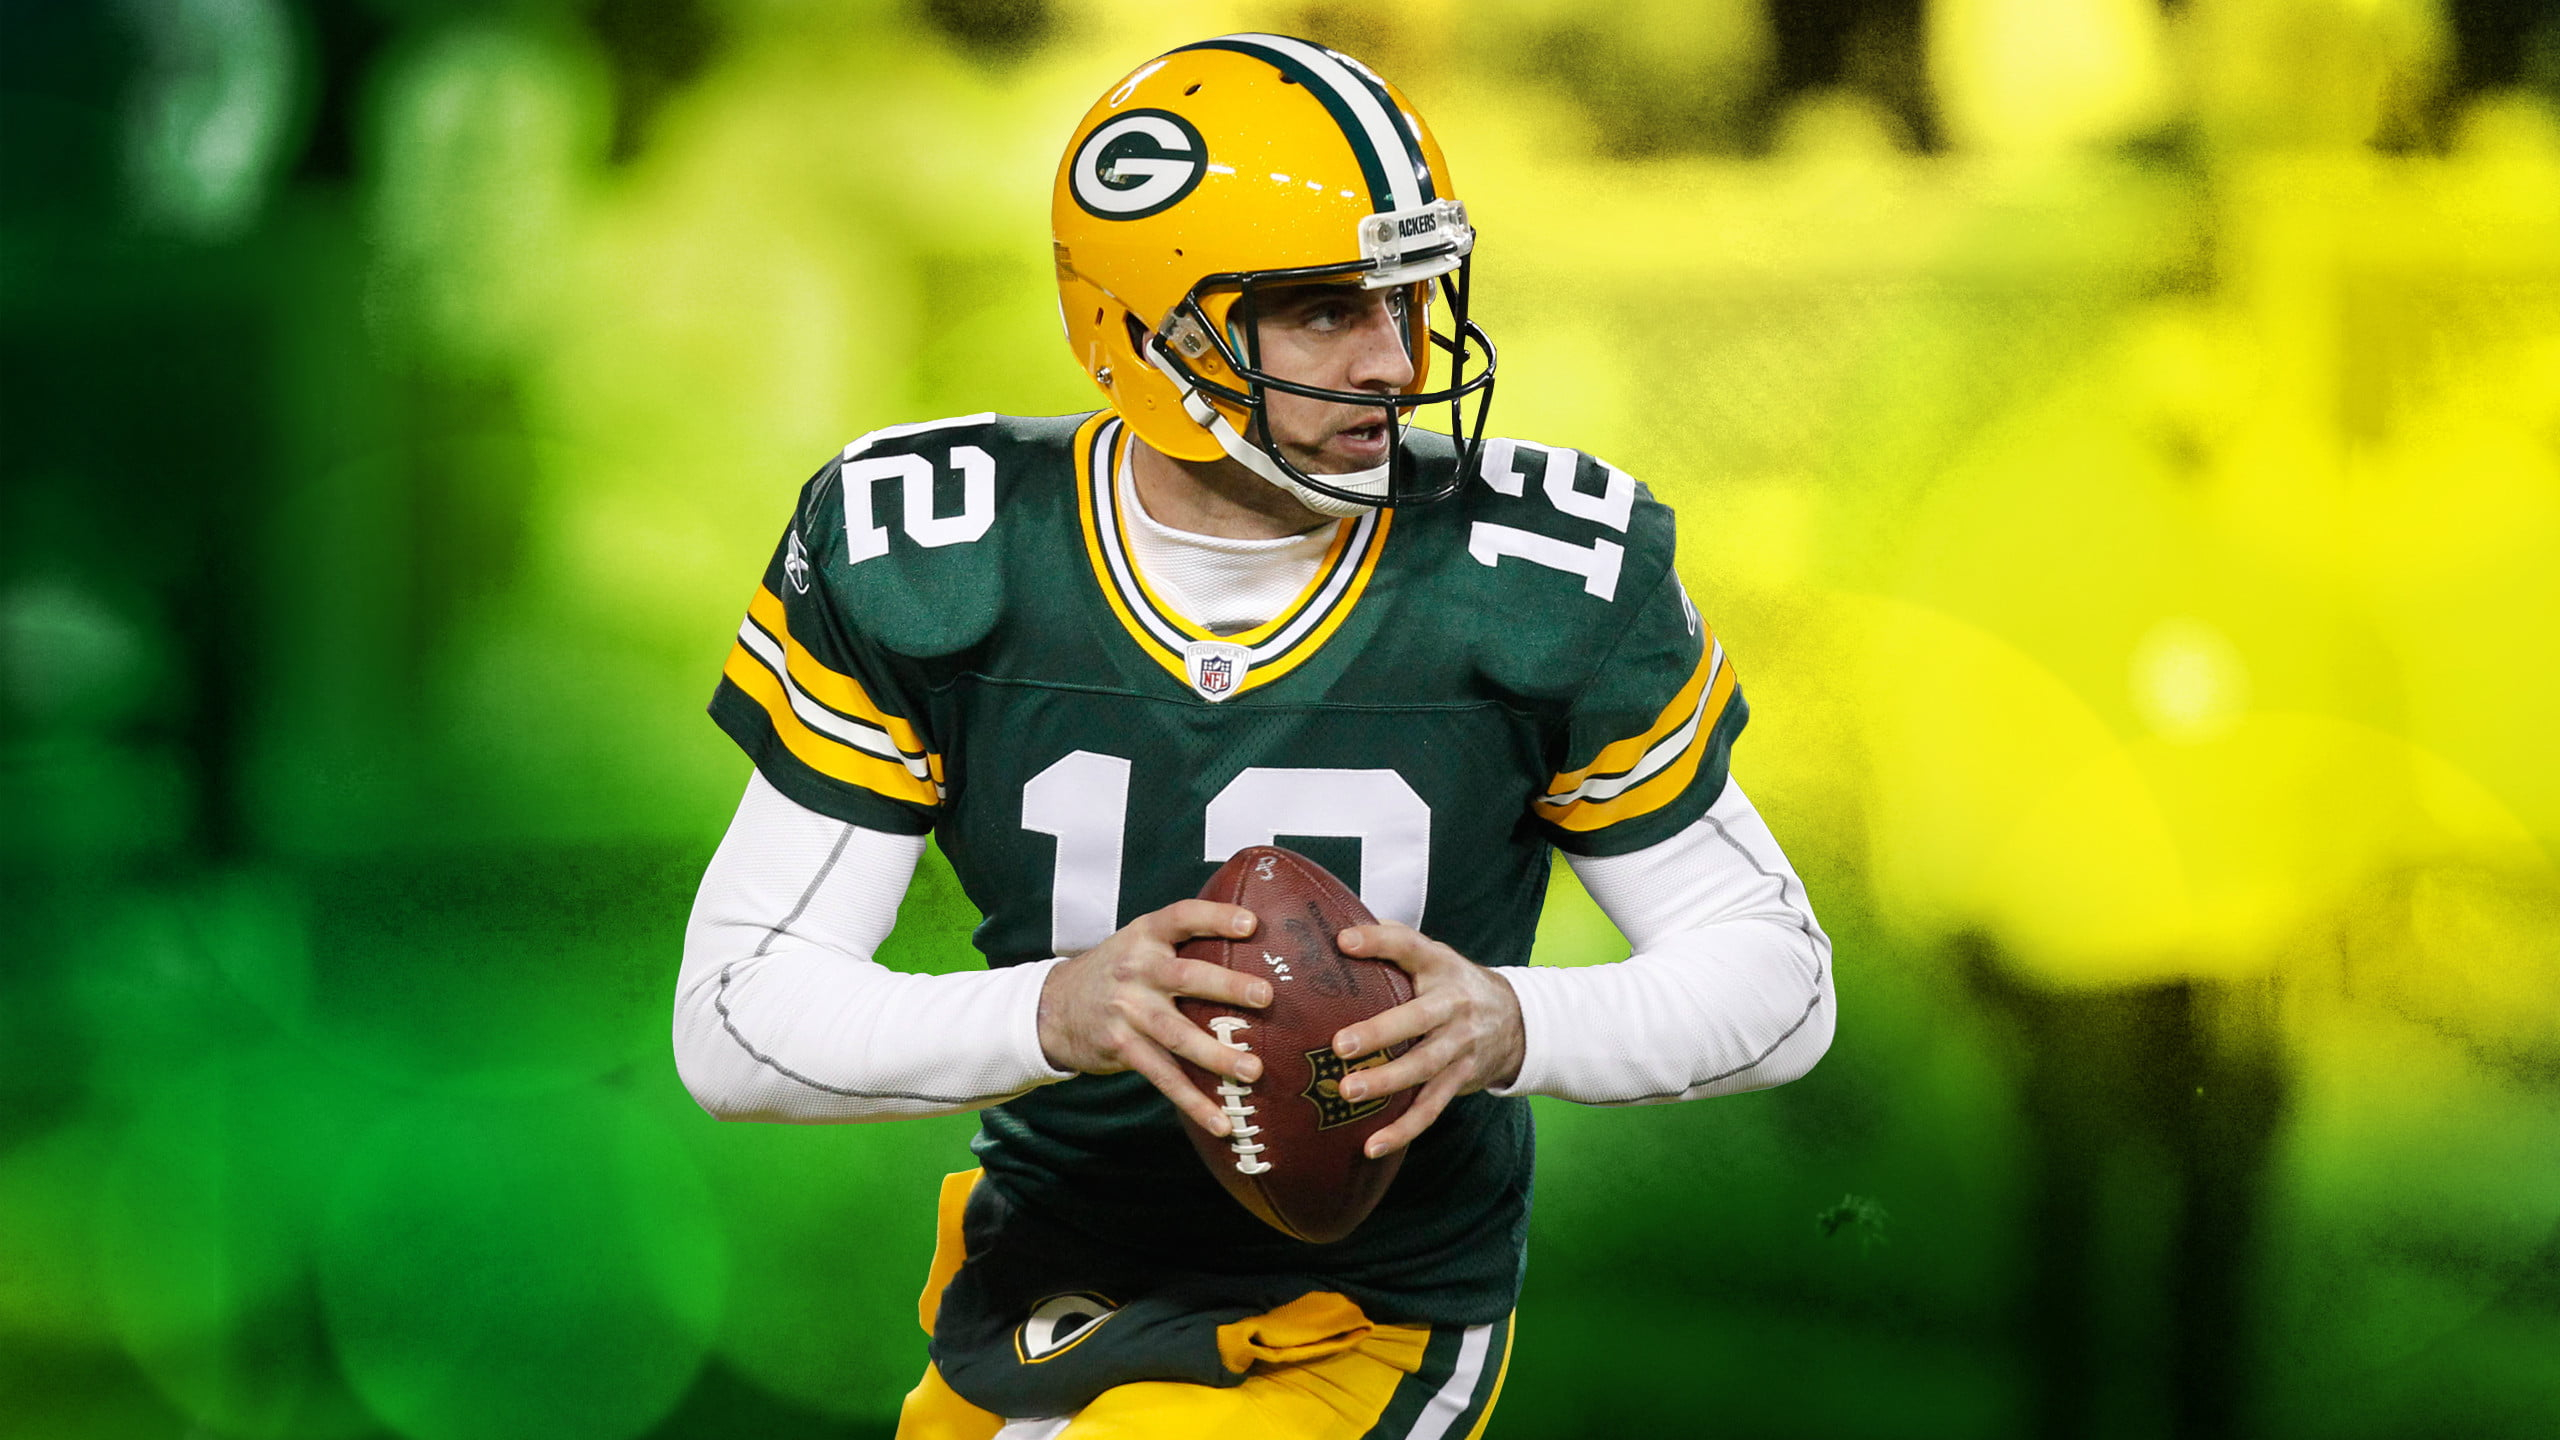 2560x1440 Green Bay Packers number 12 player HD wallpaper